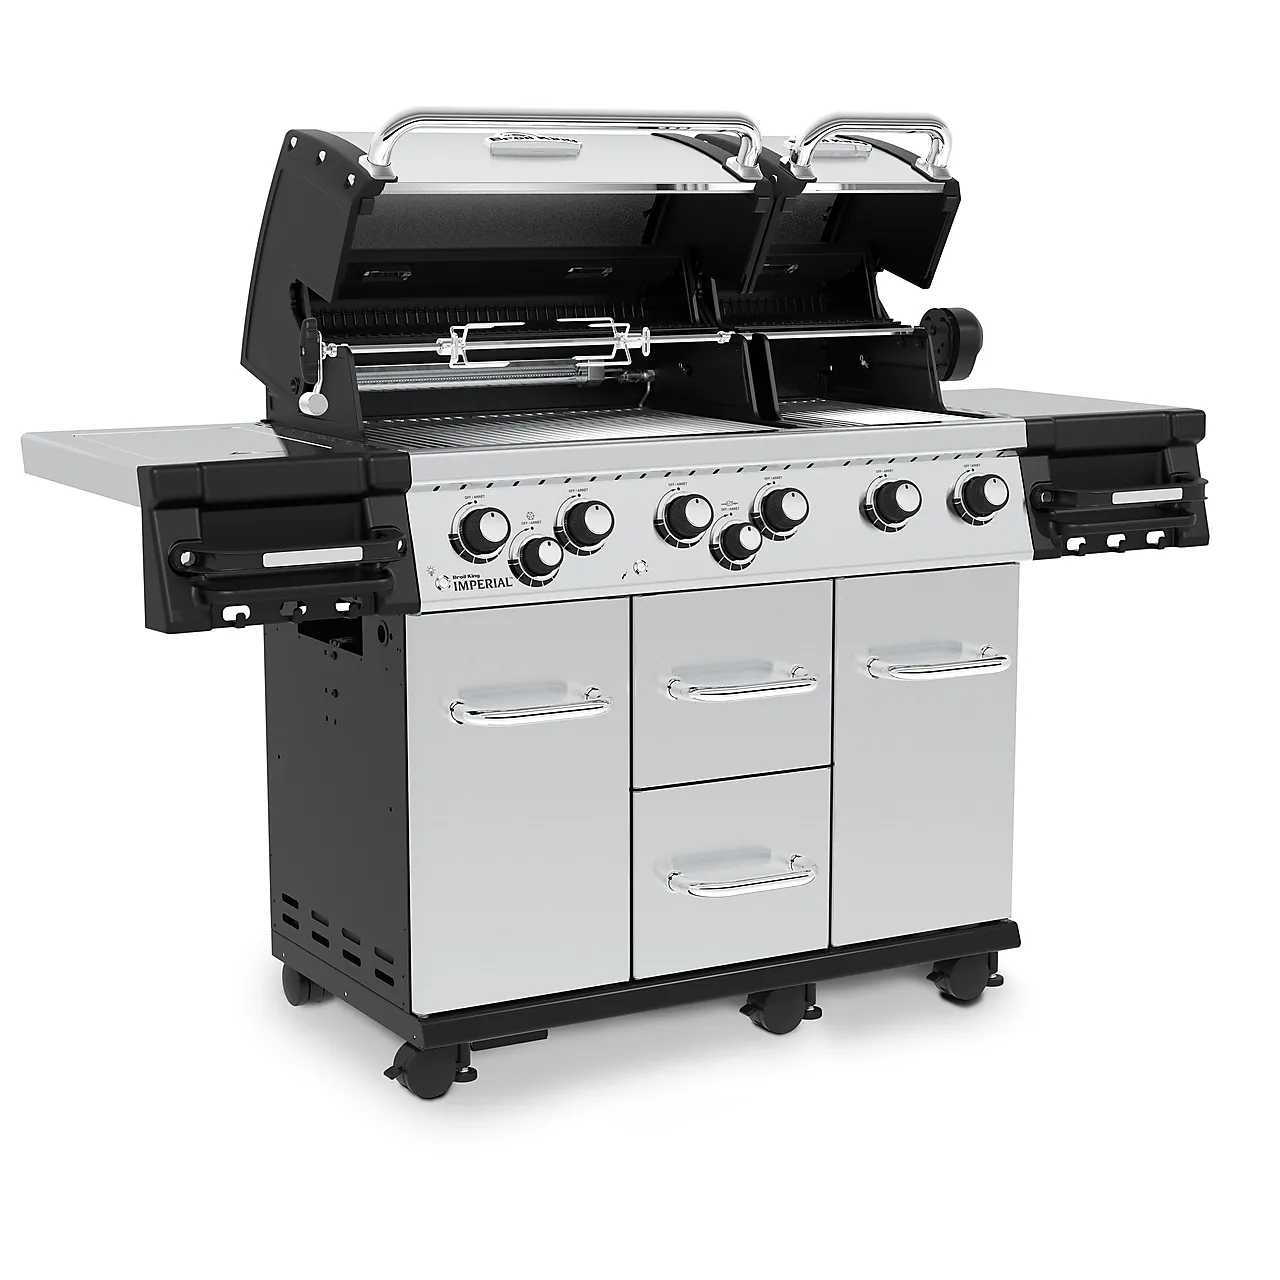 Gassgrill Imperial S 690 IR null - null - 17